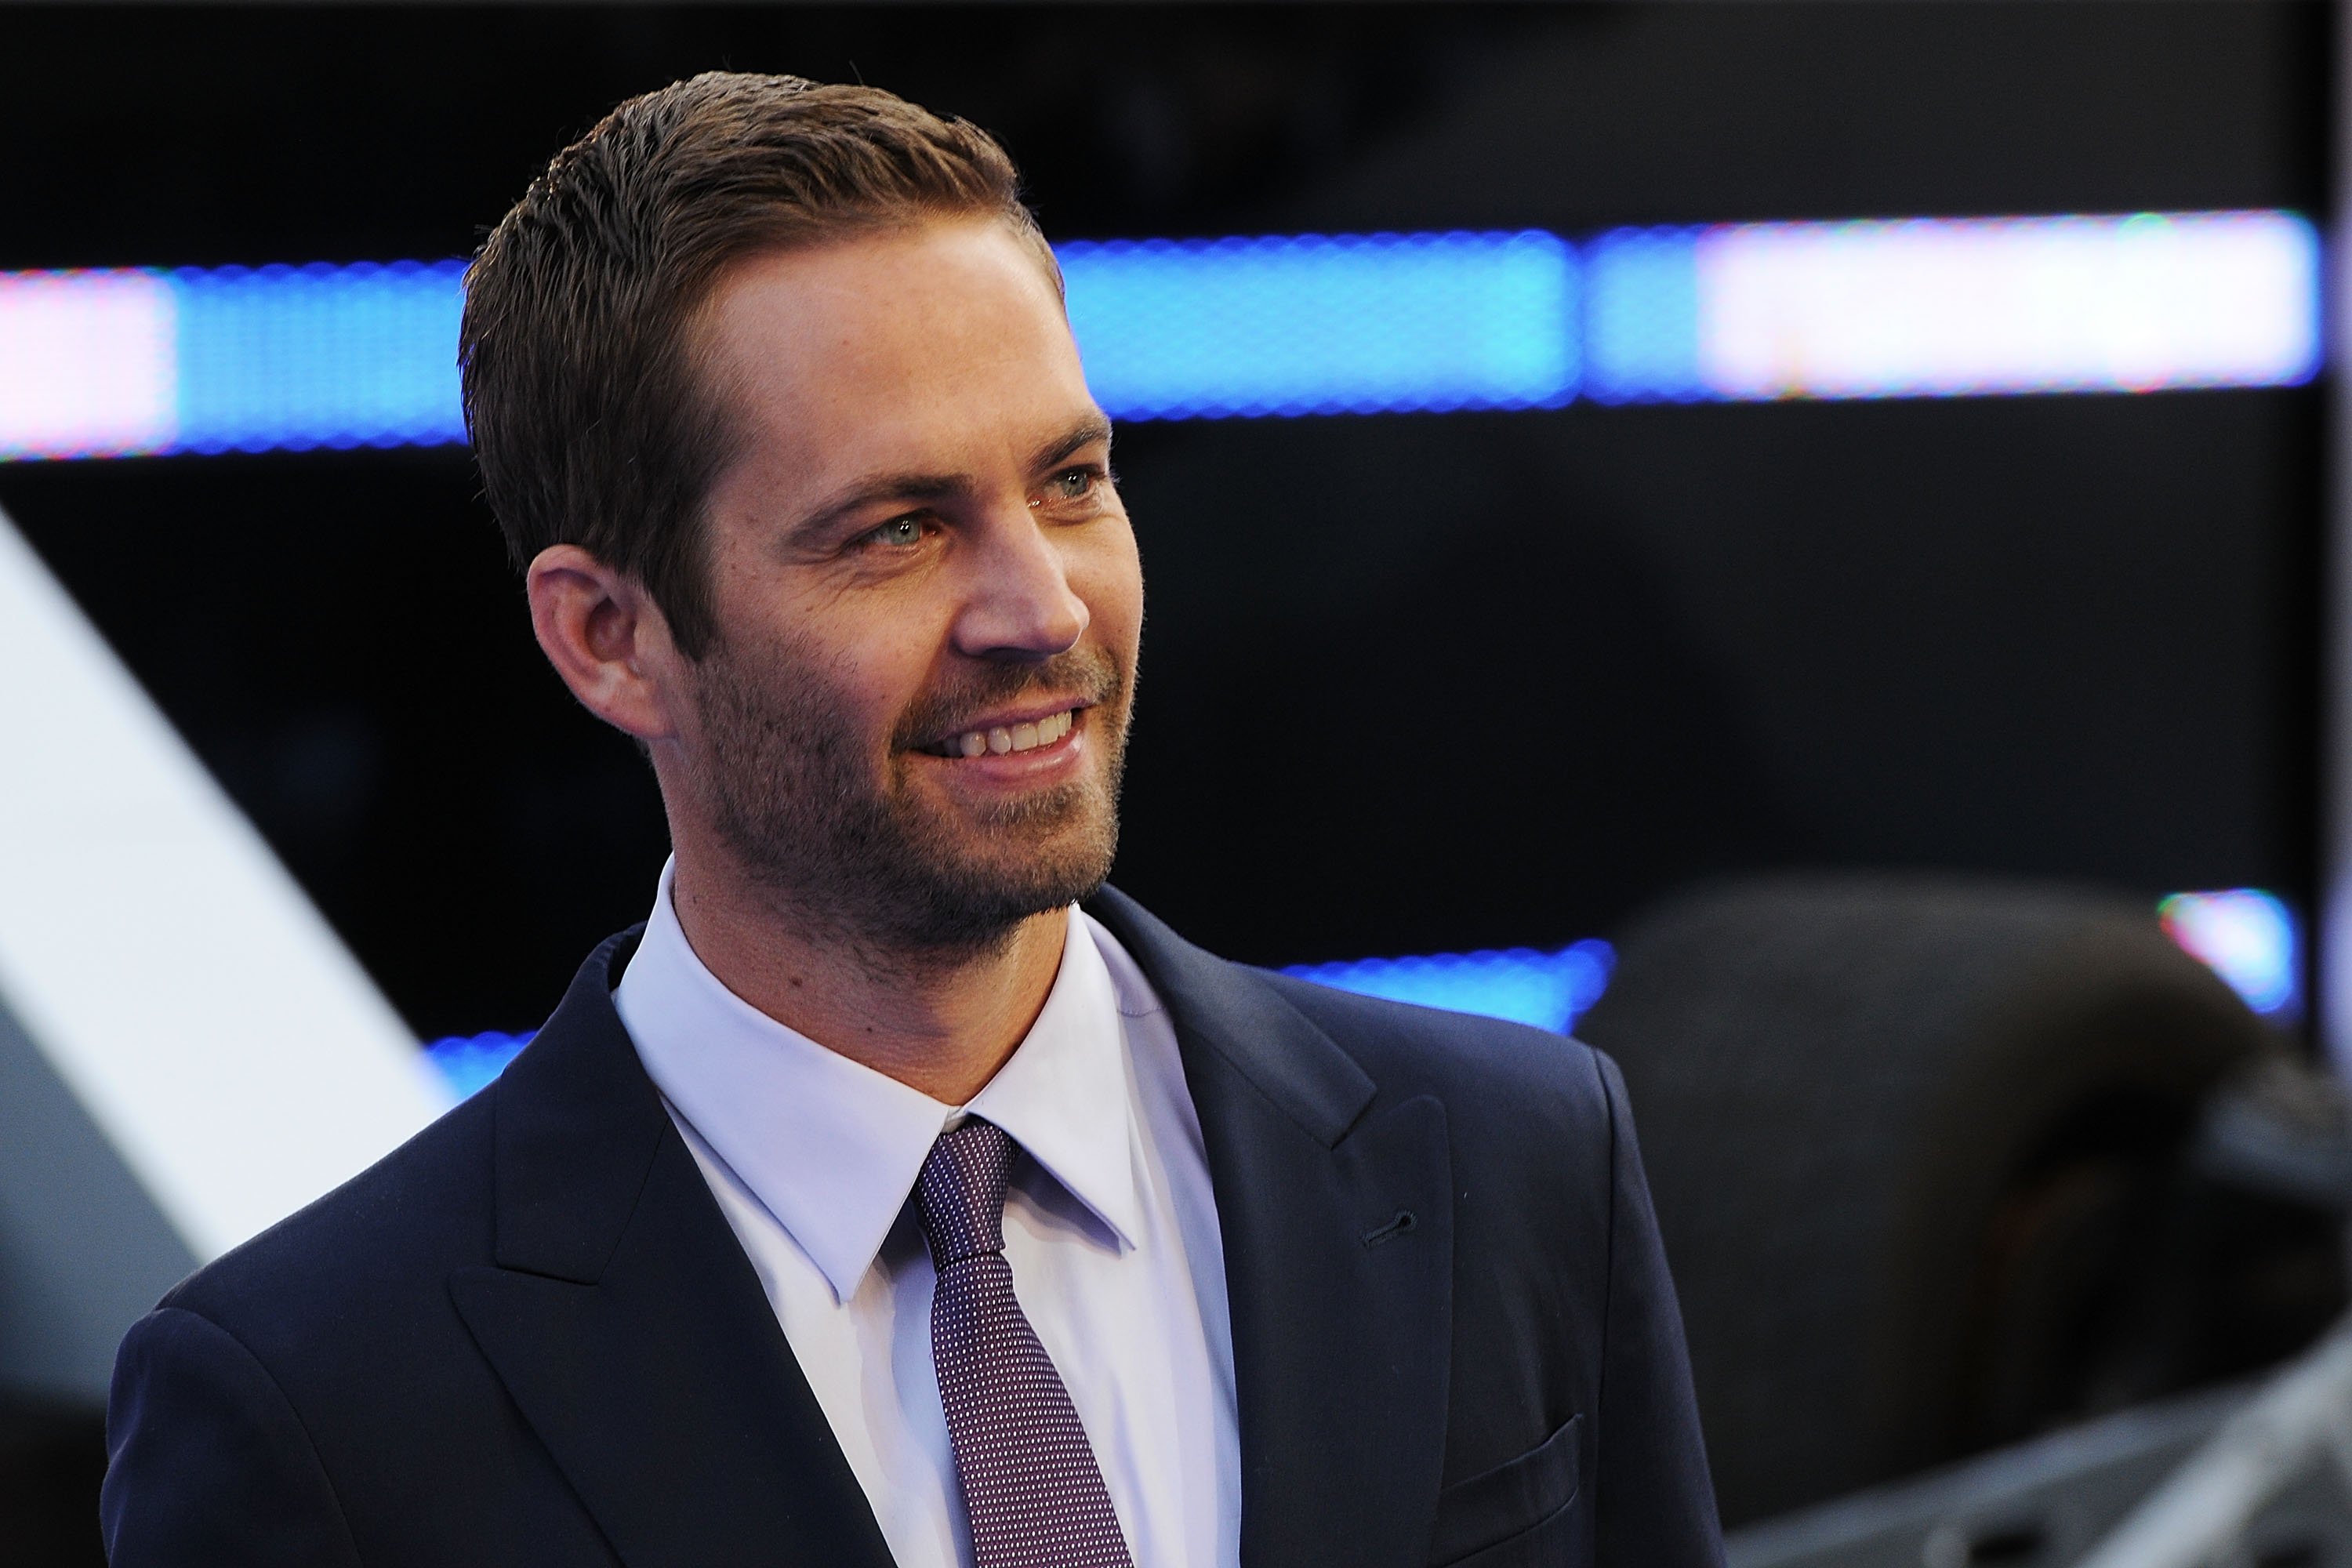 Paul Walker attends the World Premiere of 'Fast & Furious 6' at Empire Leicester Square on May 7, 2013 in London, England | Photo: Getty Images